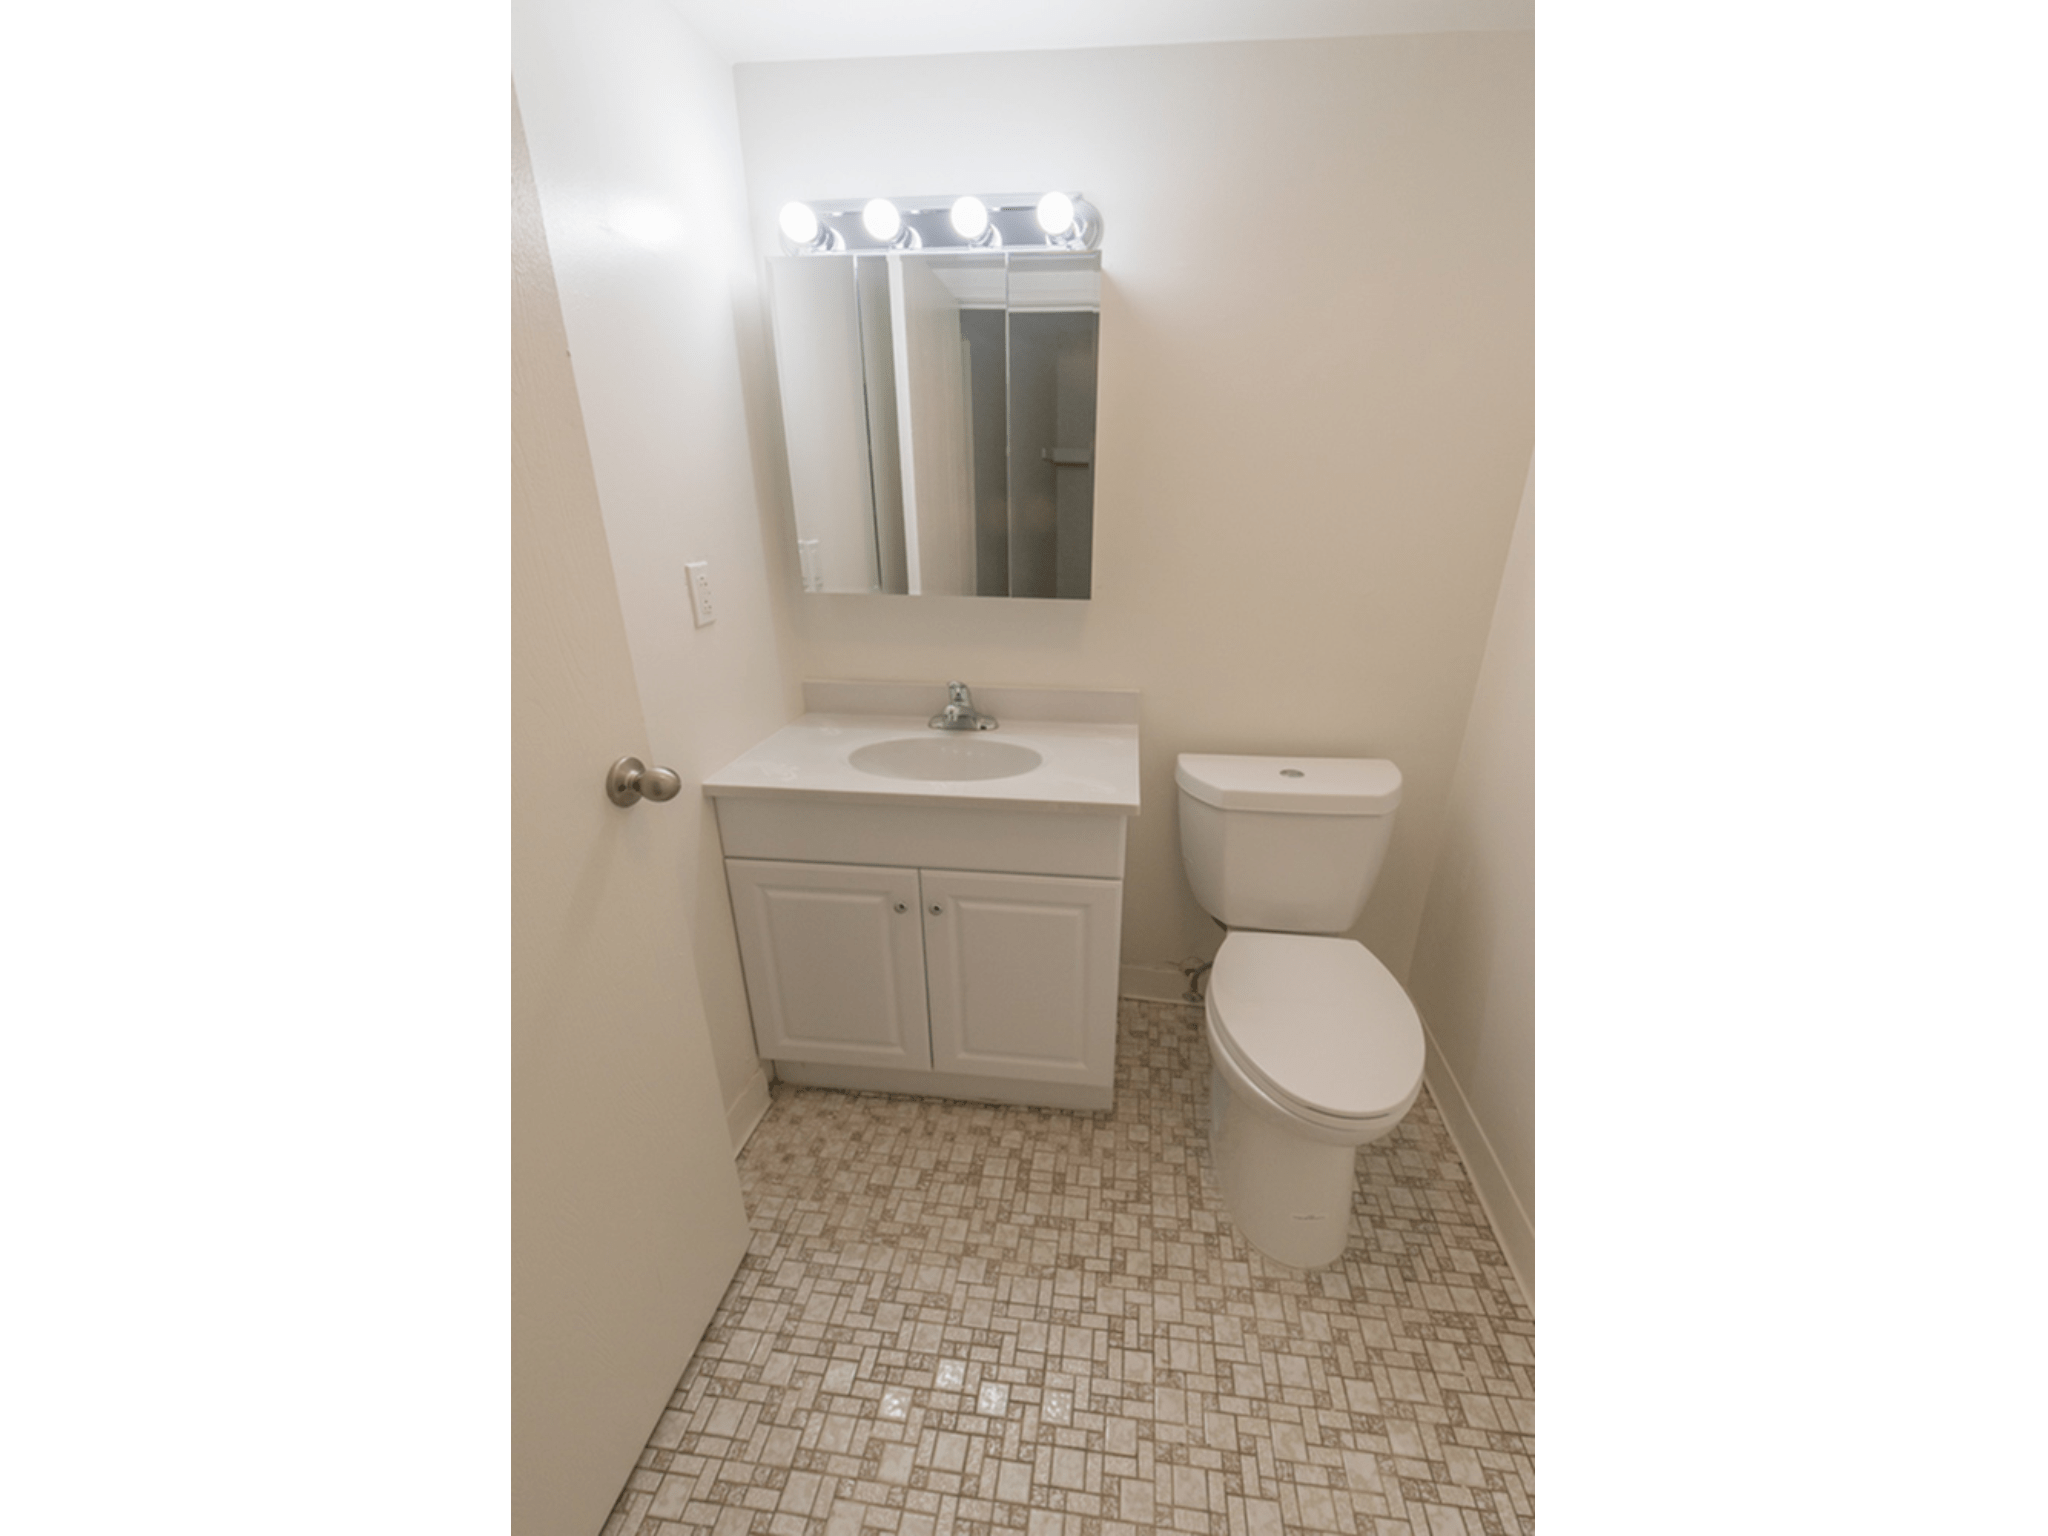 Winslow House Apartments bathroom with vanity and tiles floors